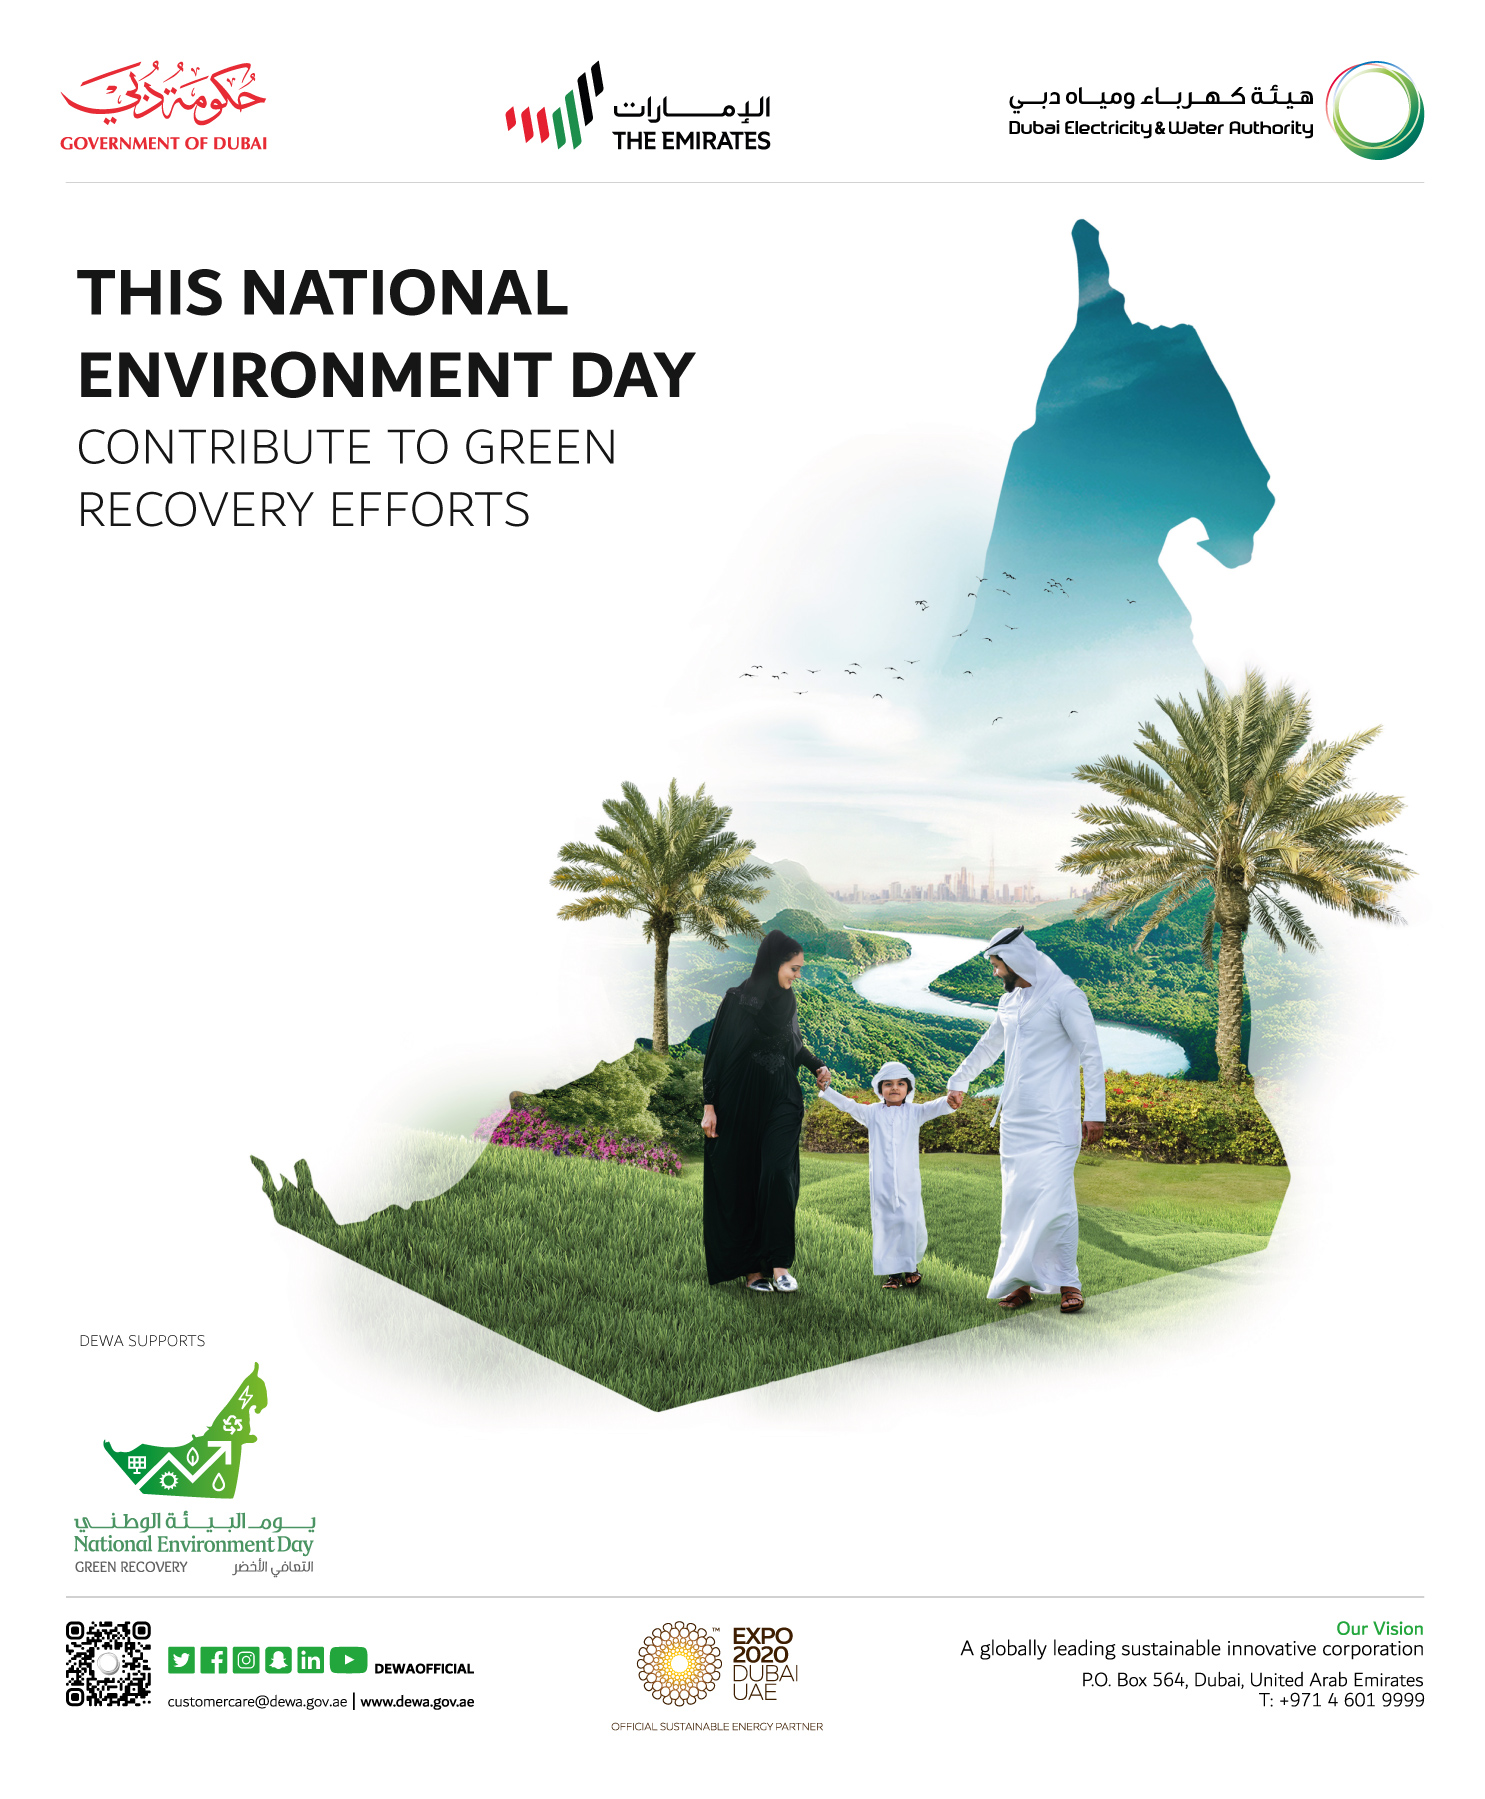 DEWA celebrates the 23rd National Environment Day under the theme ‘Green Recovery’